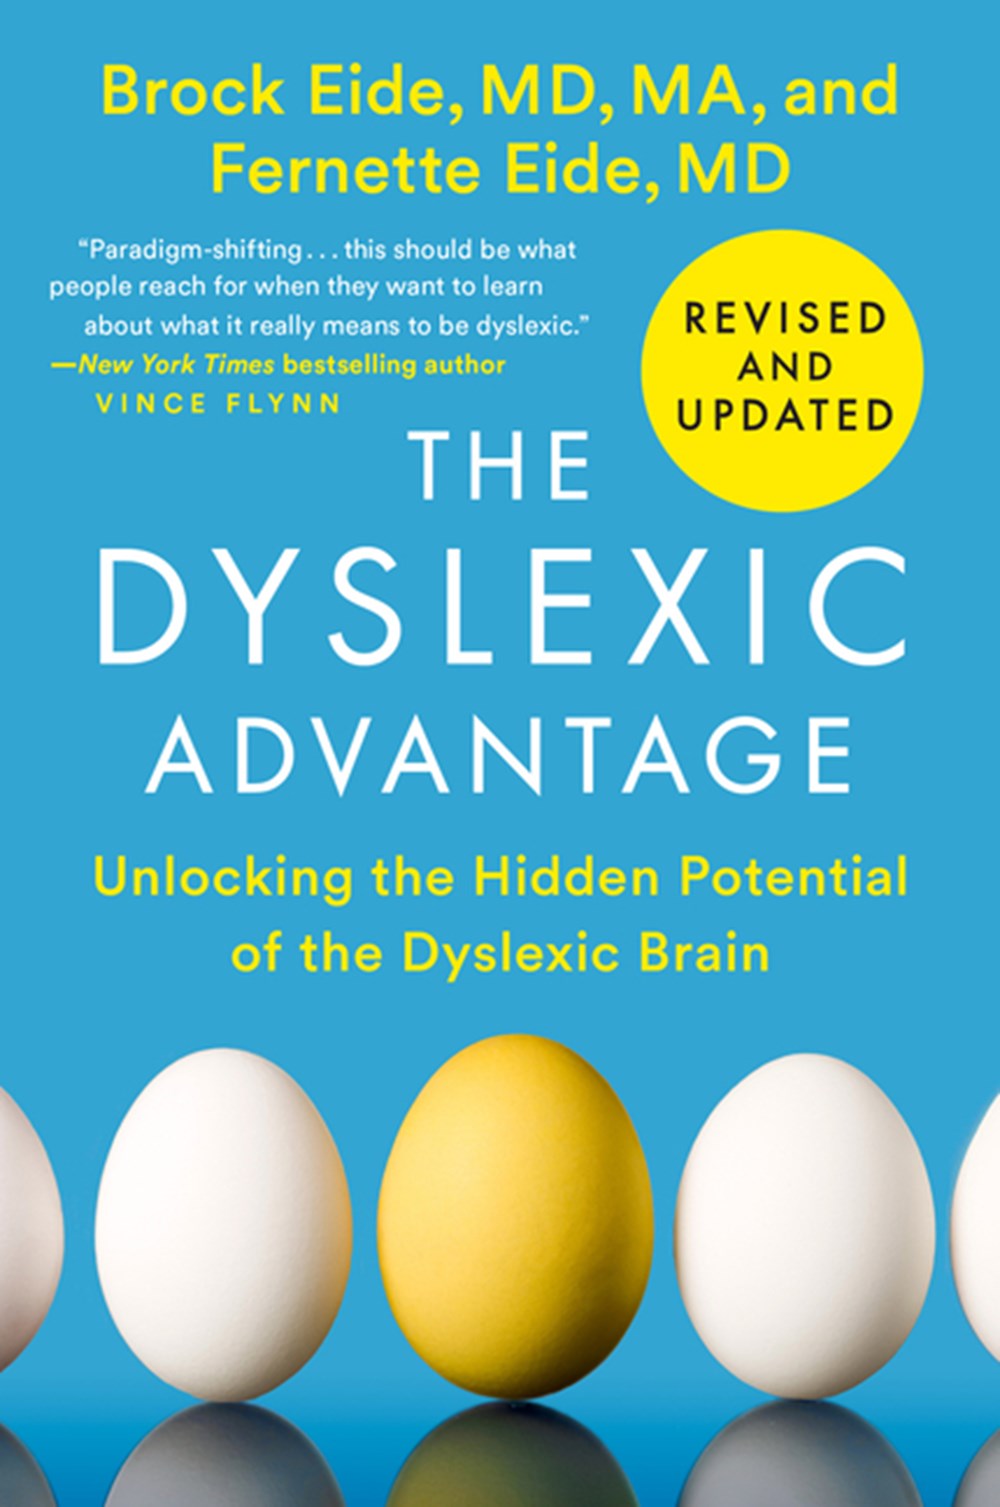 Dyslexic Advantage (Revised and Updated) Unlocking the Hidden Potential of the Dyslexic Brain